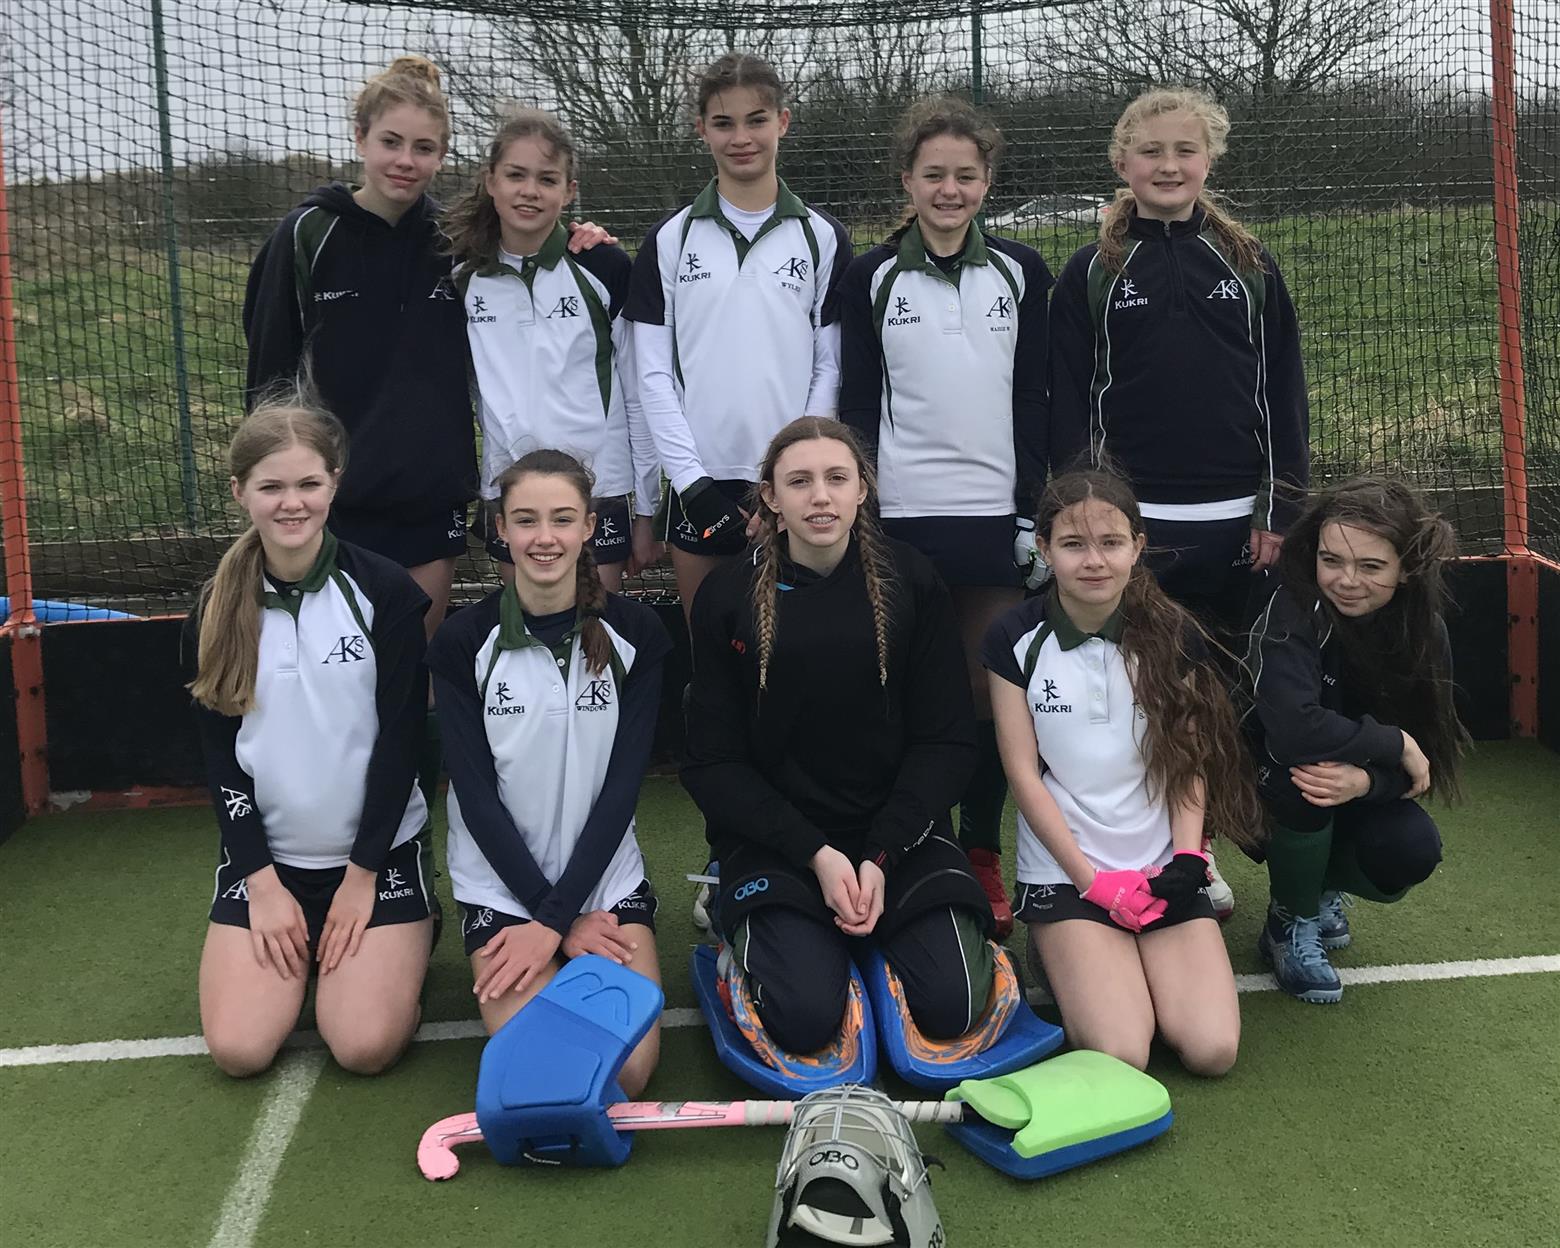 U13 Hockey team qualify for National in two finals